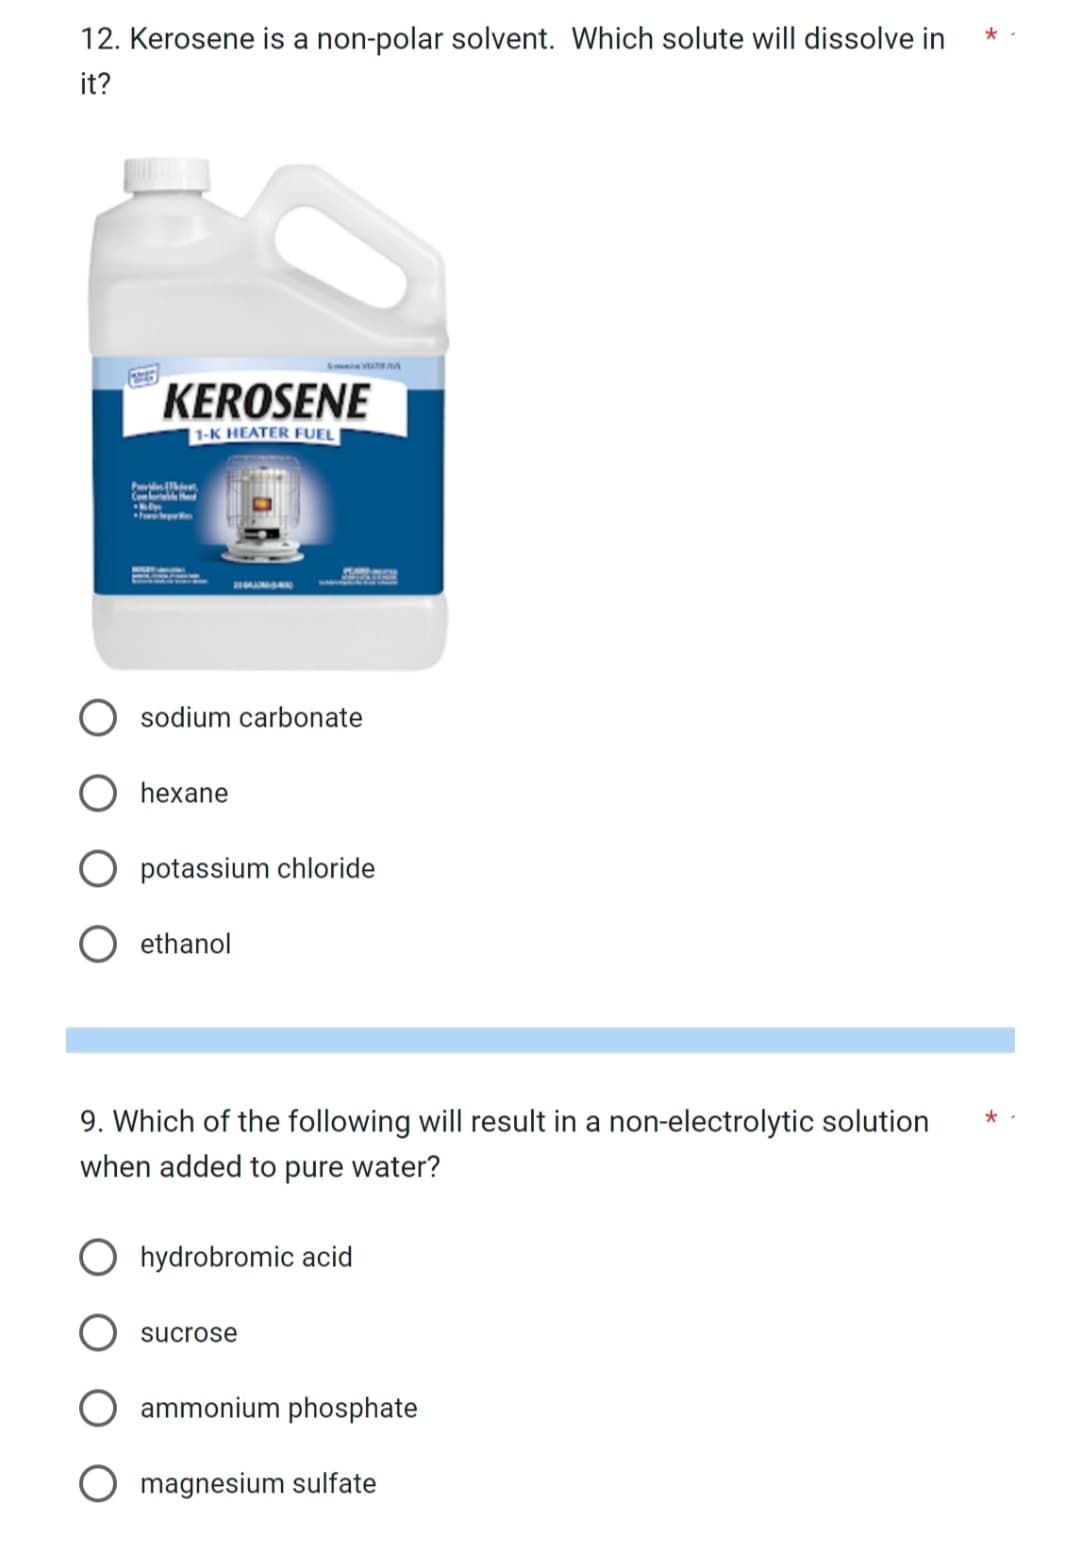 12. Kerosene is a non-polar solvent. Which solute will dissolve in
it?
Provides
Com
KEROSENE
1-K HEATER FUEL
sodium carbonate
O hexane
potassium chloride
ethanol
9. Which of the following will result in a non-electrolytic solution
when added to pure water?
hydrobromic acid
sucrose
ammonium phosphate
magnesium sulfate
*.